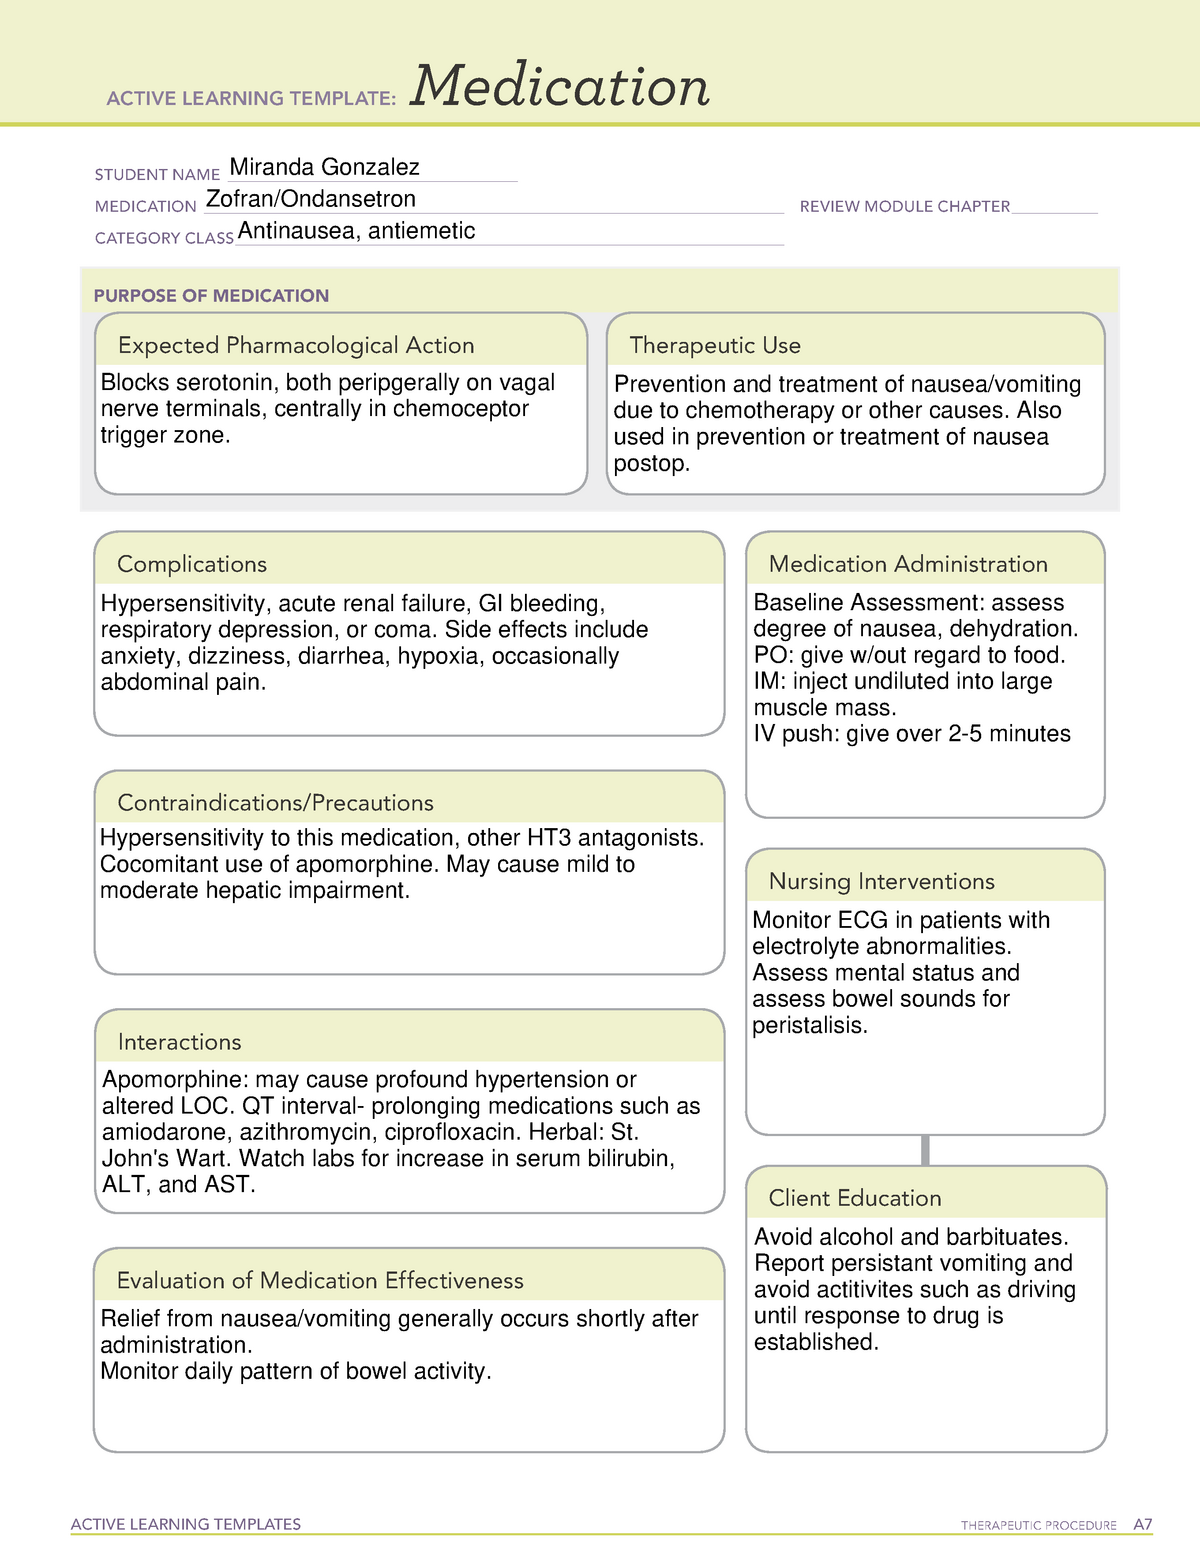 zofran-drug-card-active-learning-templates-therapeutic-procedure-a